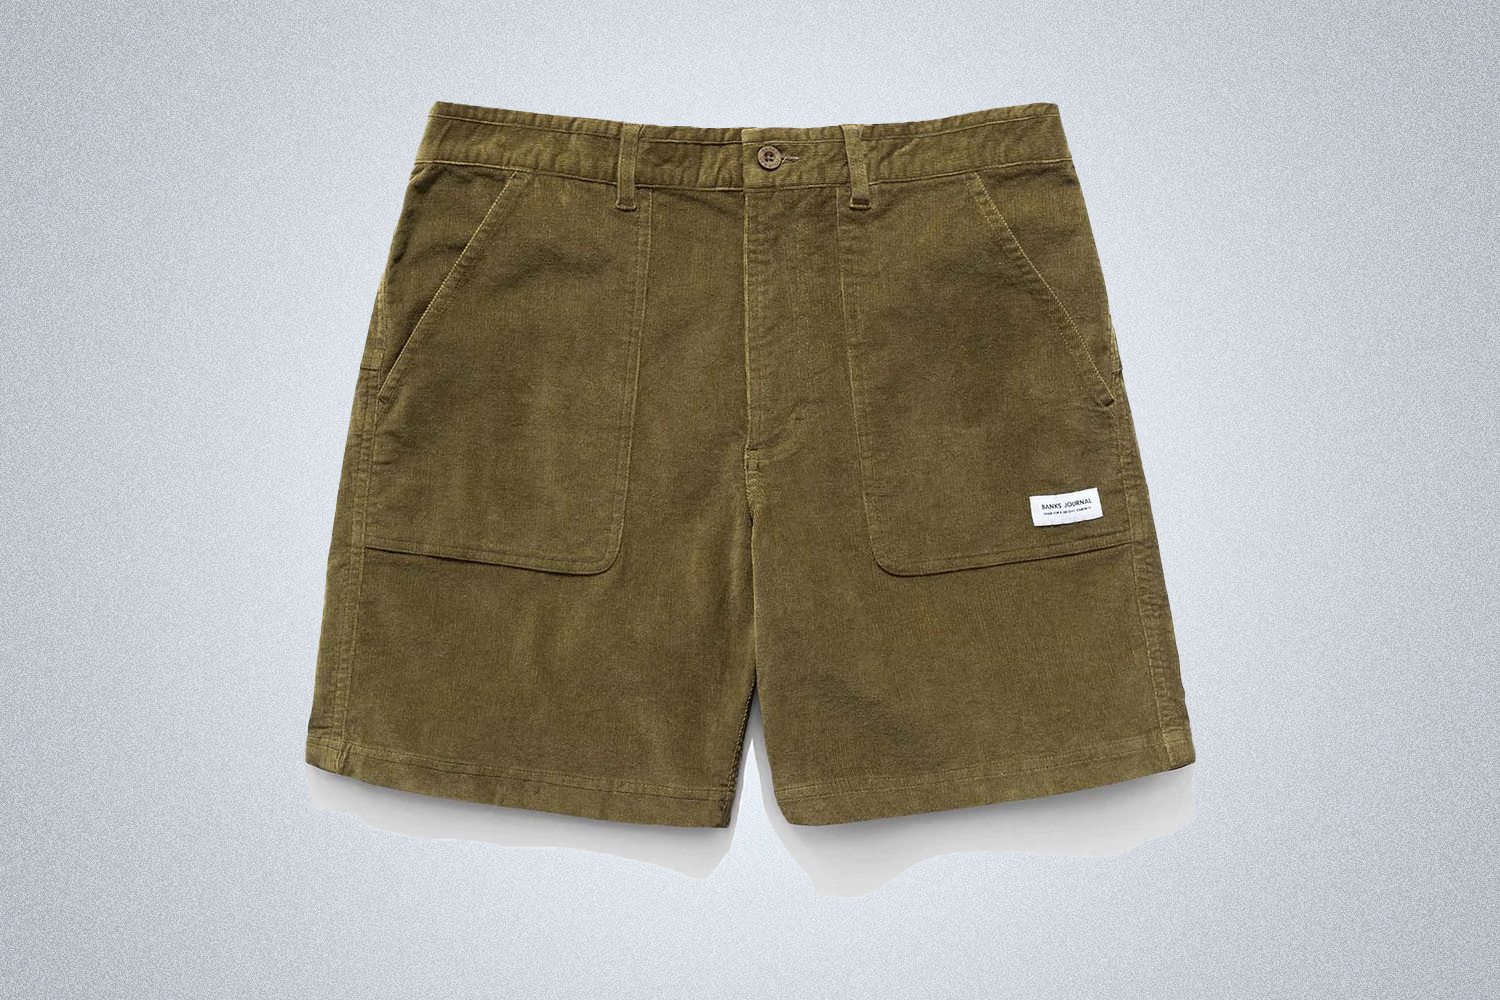 a pair of olvie green Banks Journal corduroy shorts on a grey background